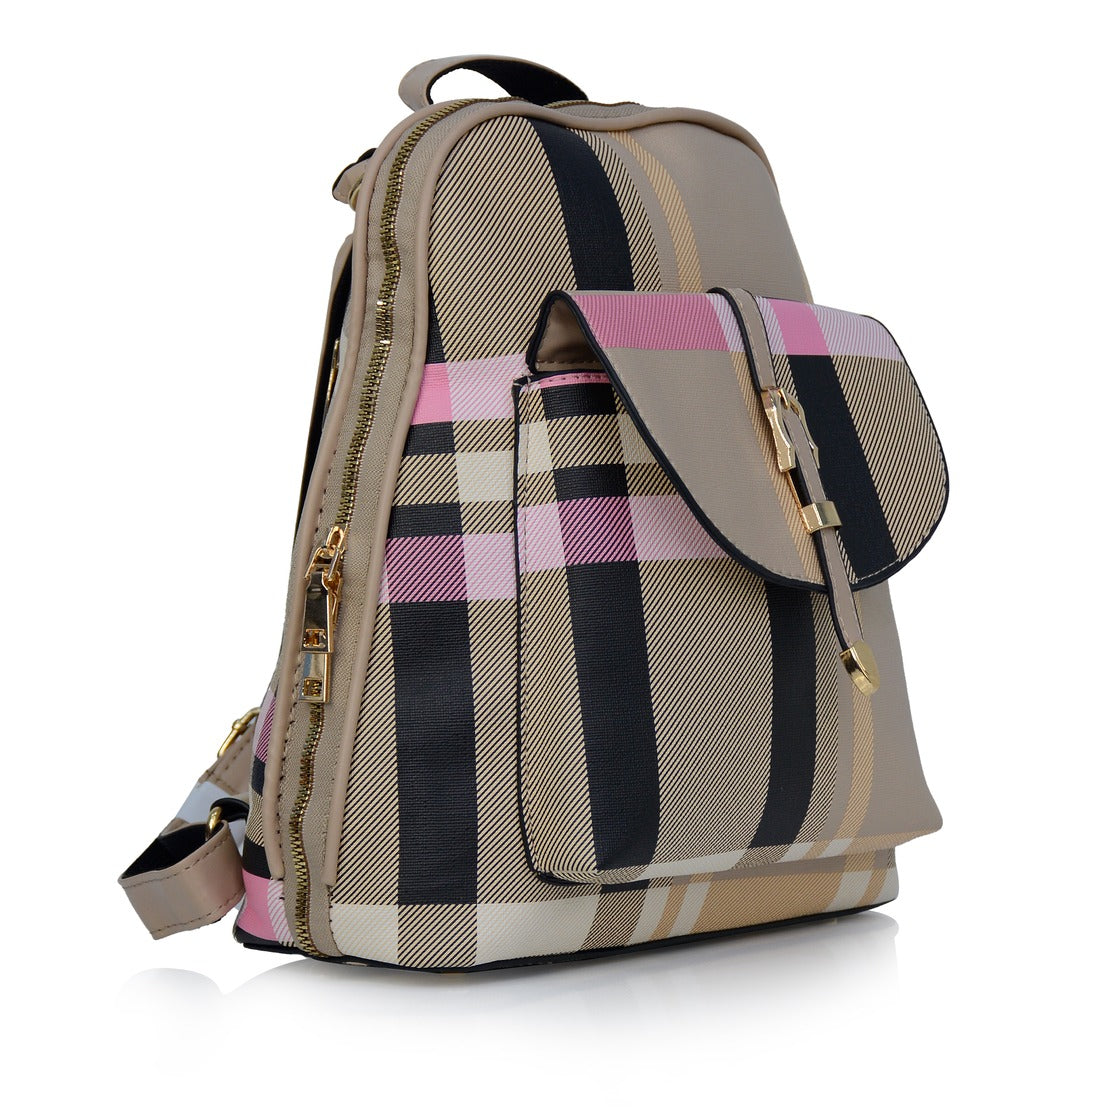 Long Check Backpack For Women outdoor Bag